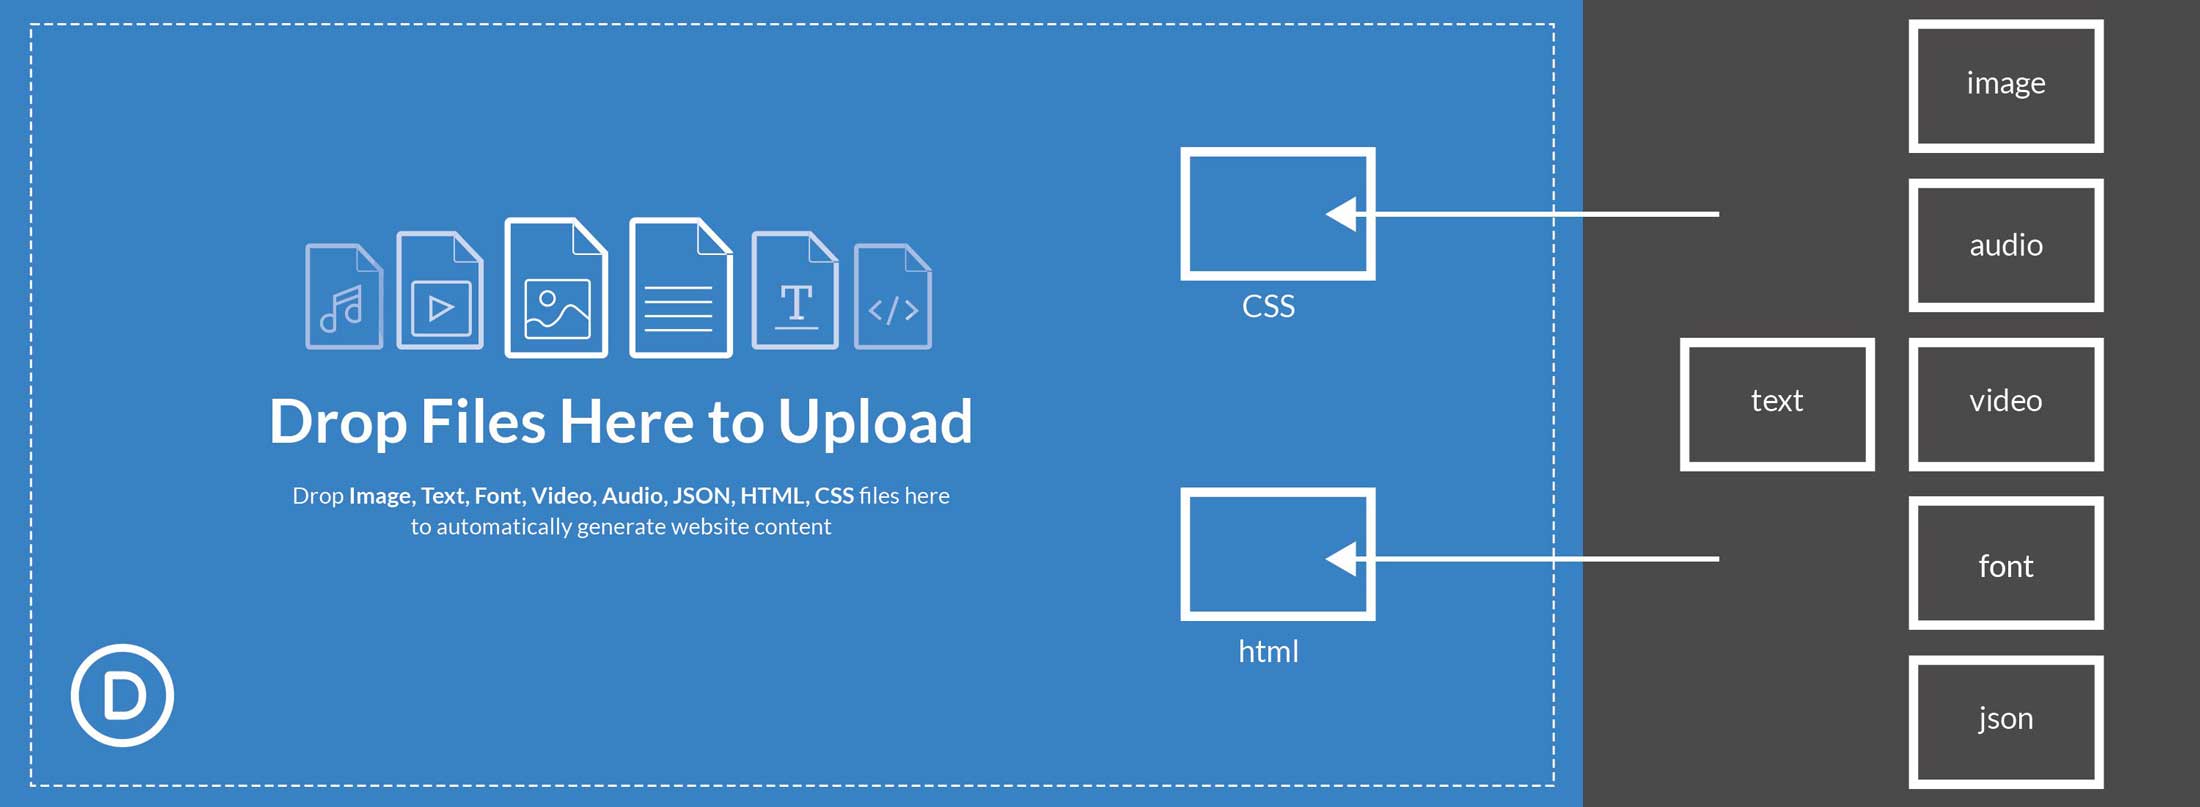 drag and drop file upload feature